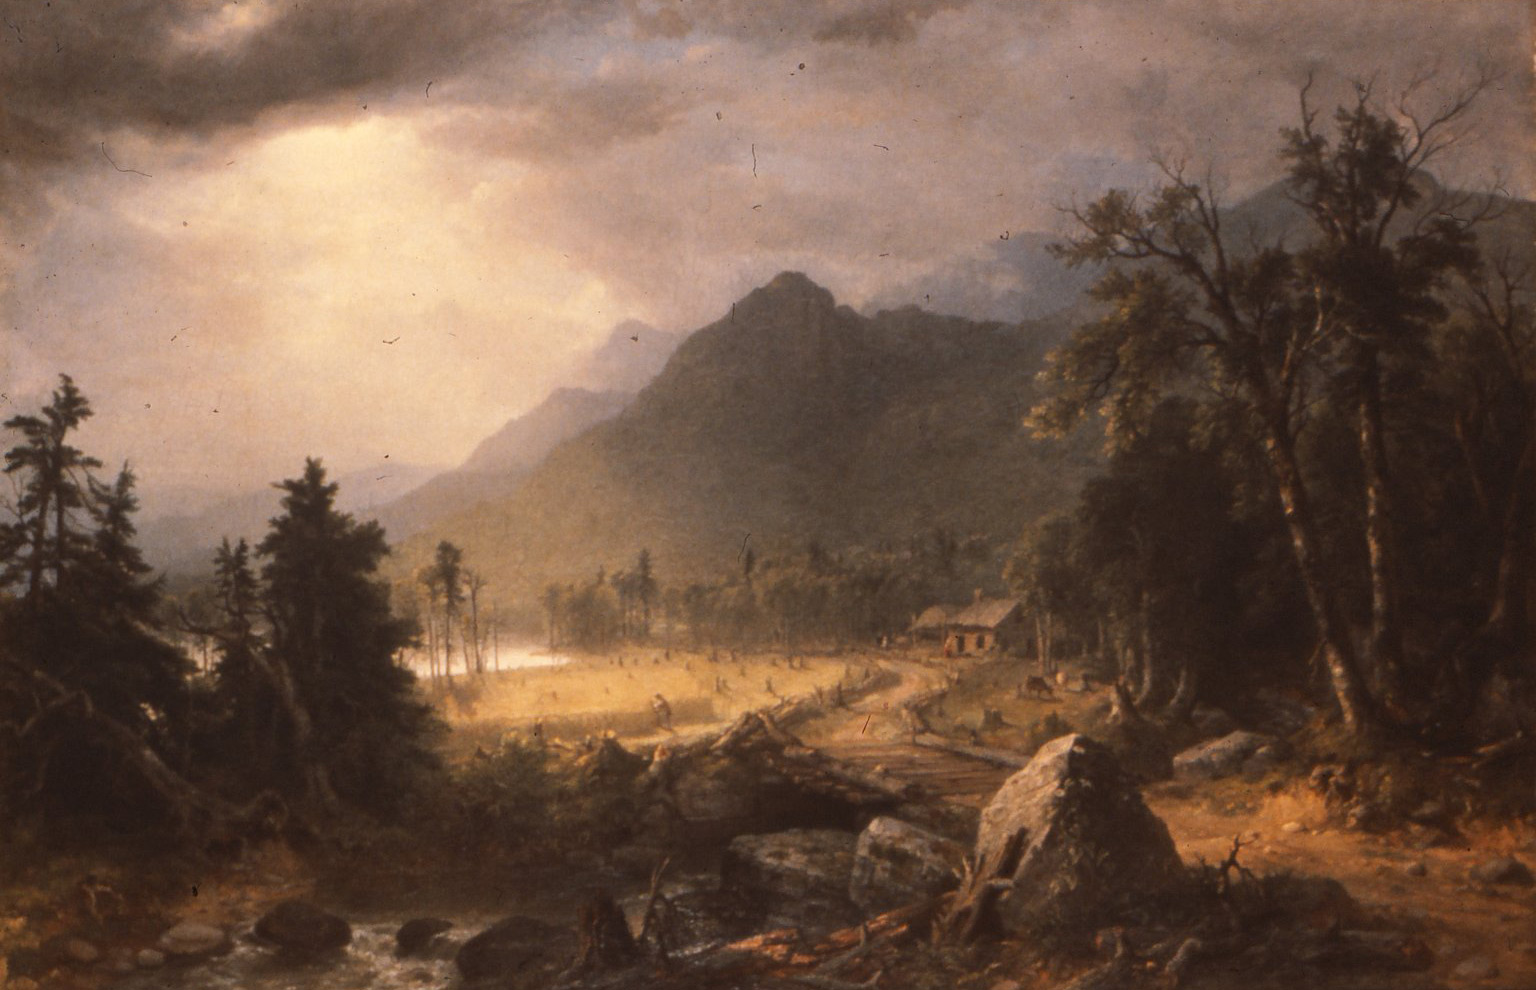 Early American Lit and Culture » Blog Archive » Thomas Cole